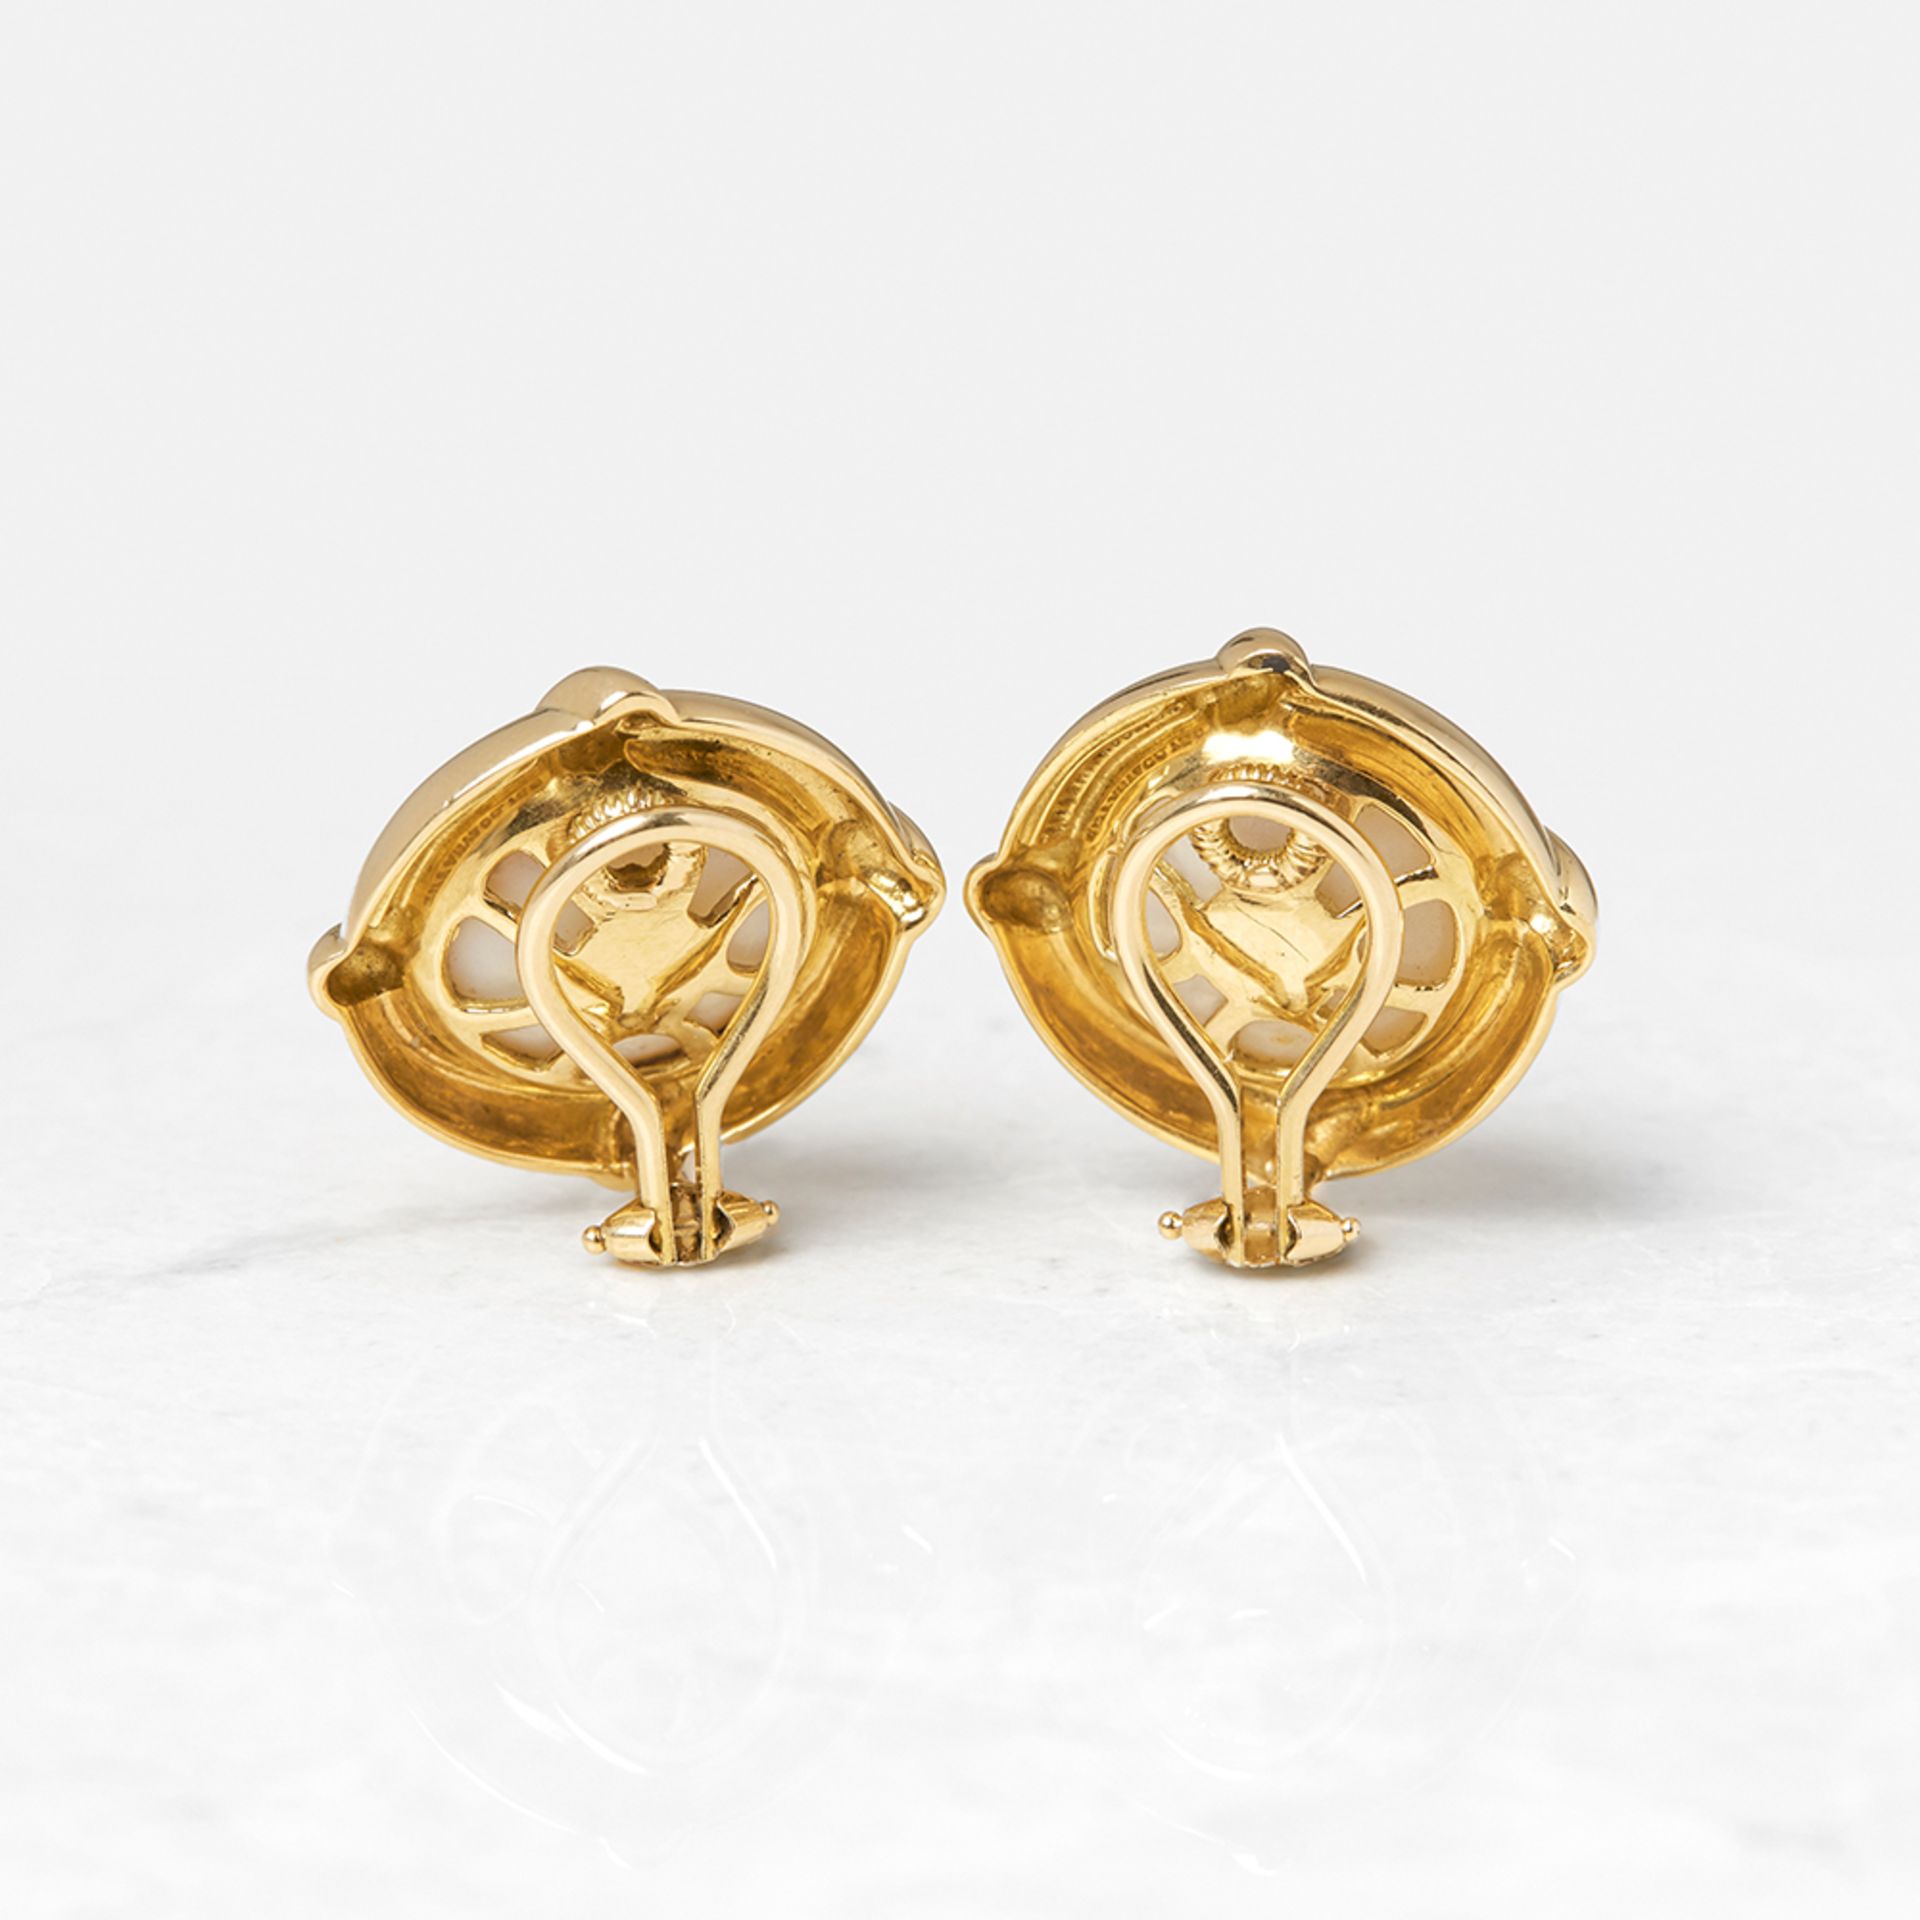 Tiffany & Co. 18k Yellow Gold Mabe Pearl Earrings - Image 5 of 9